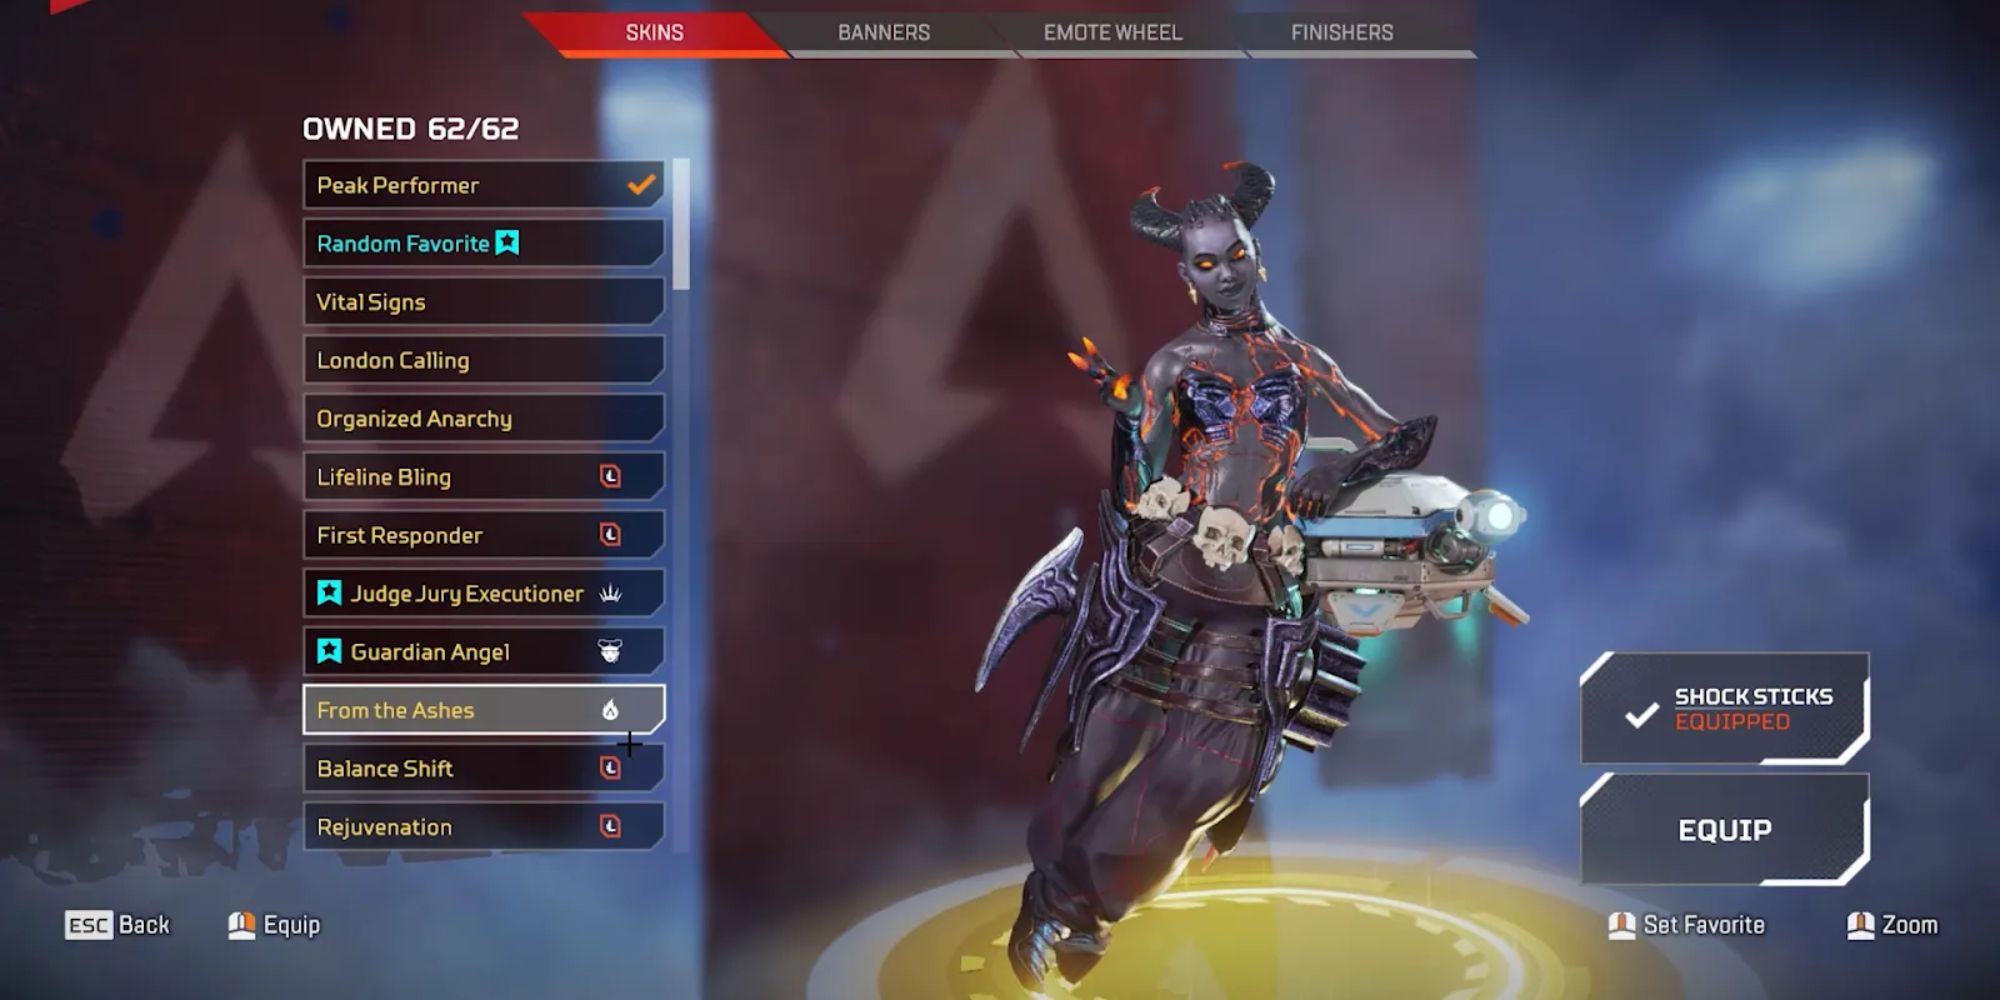 An image of Lifeline's From The Ashes skin in Apex Legends